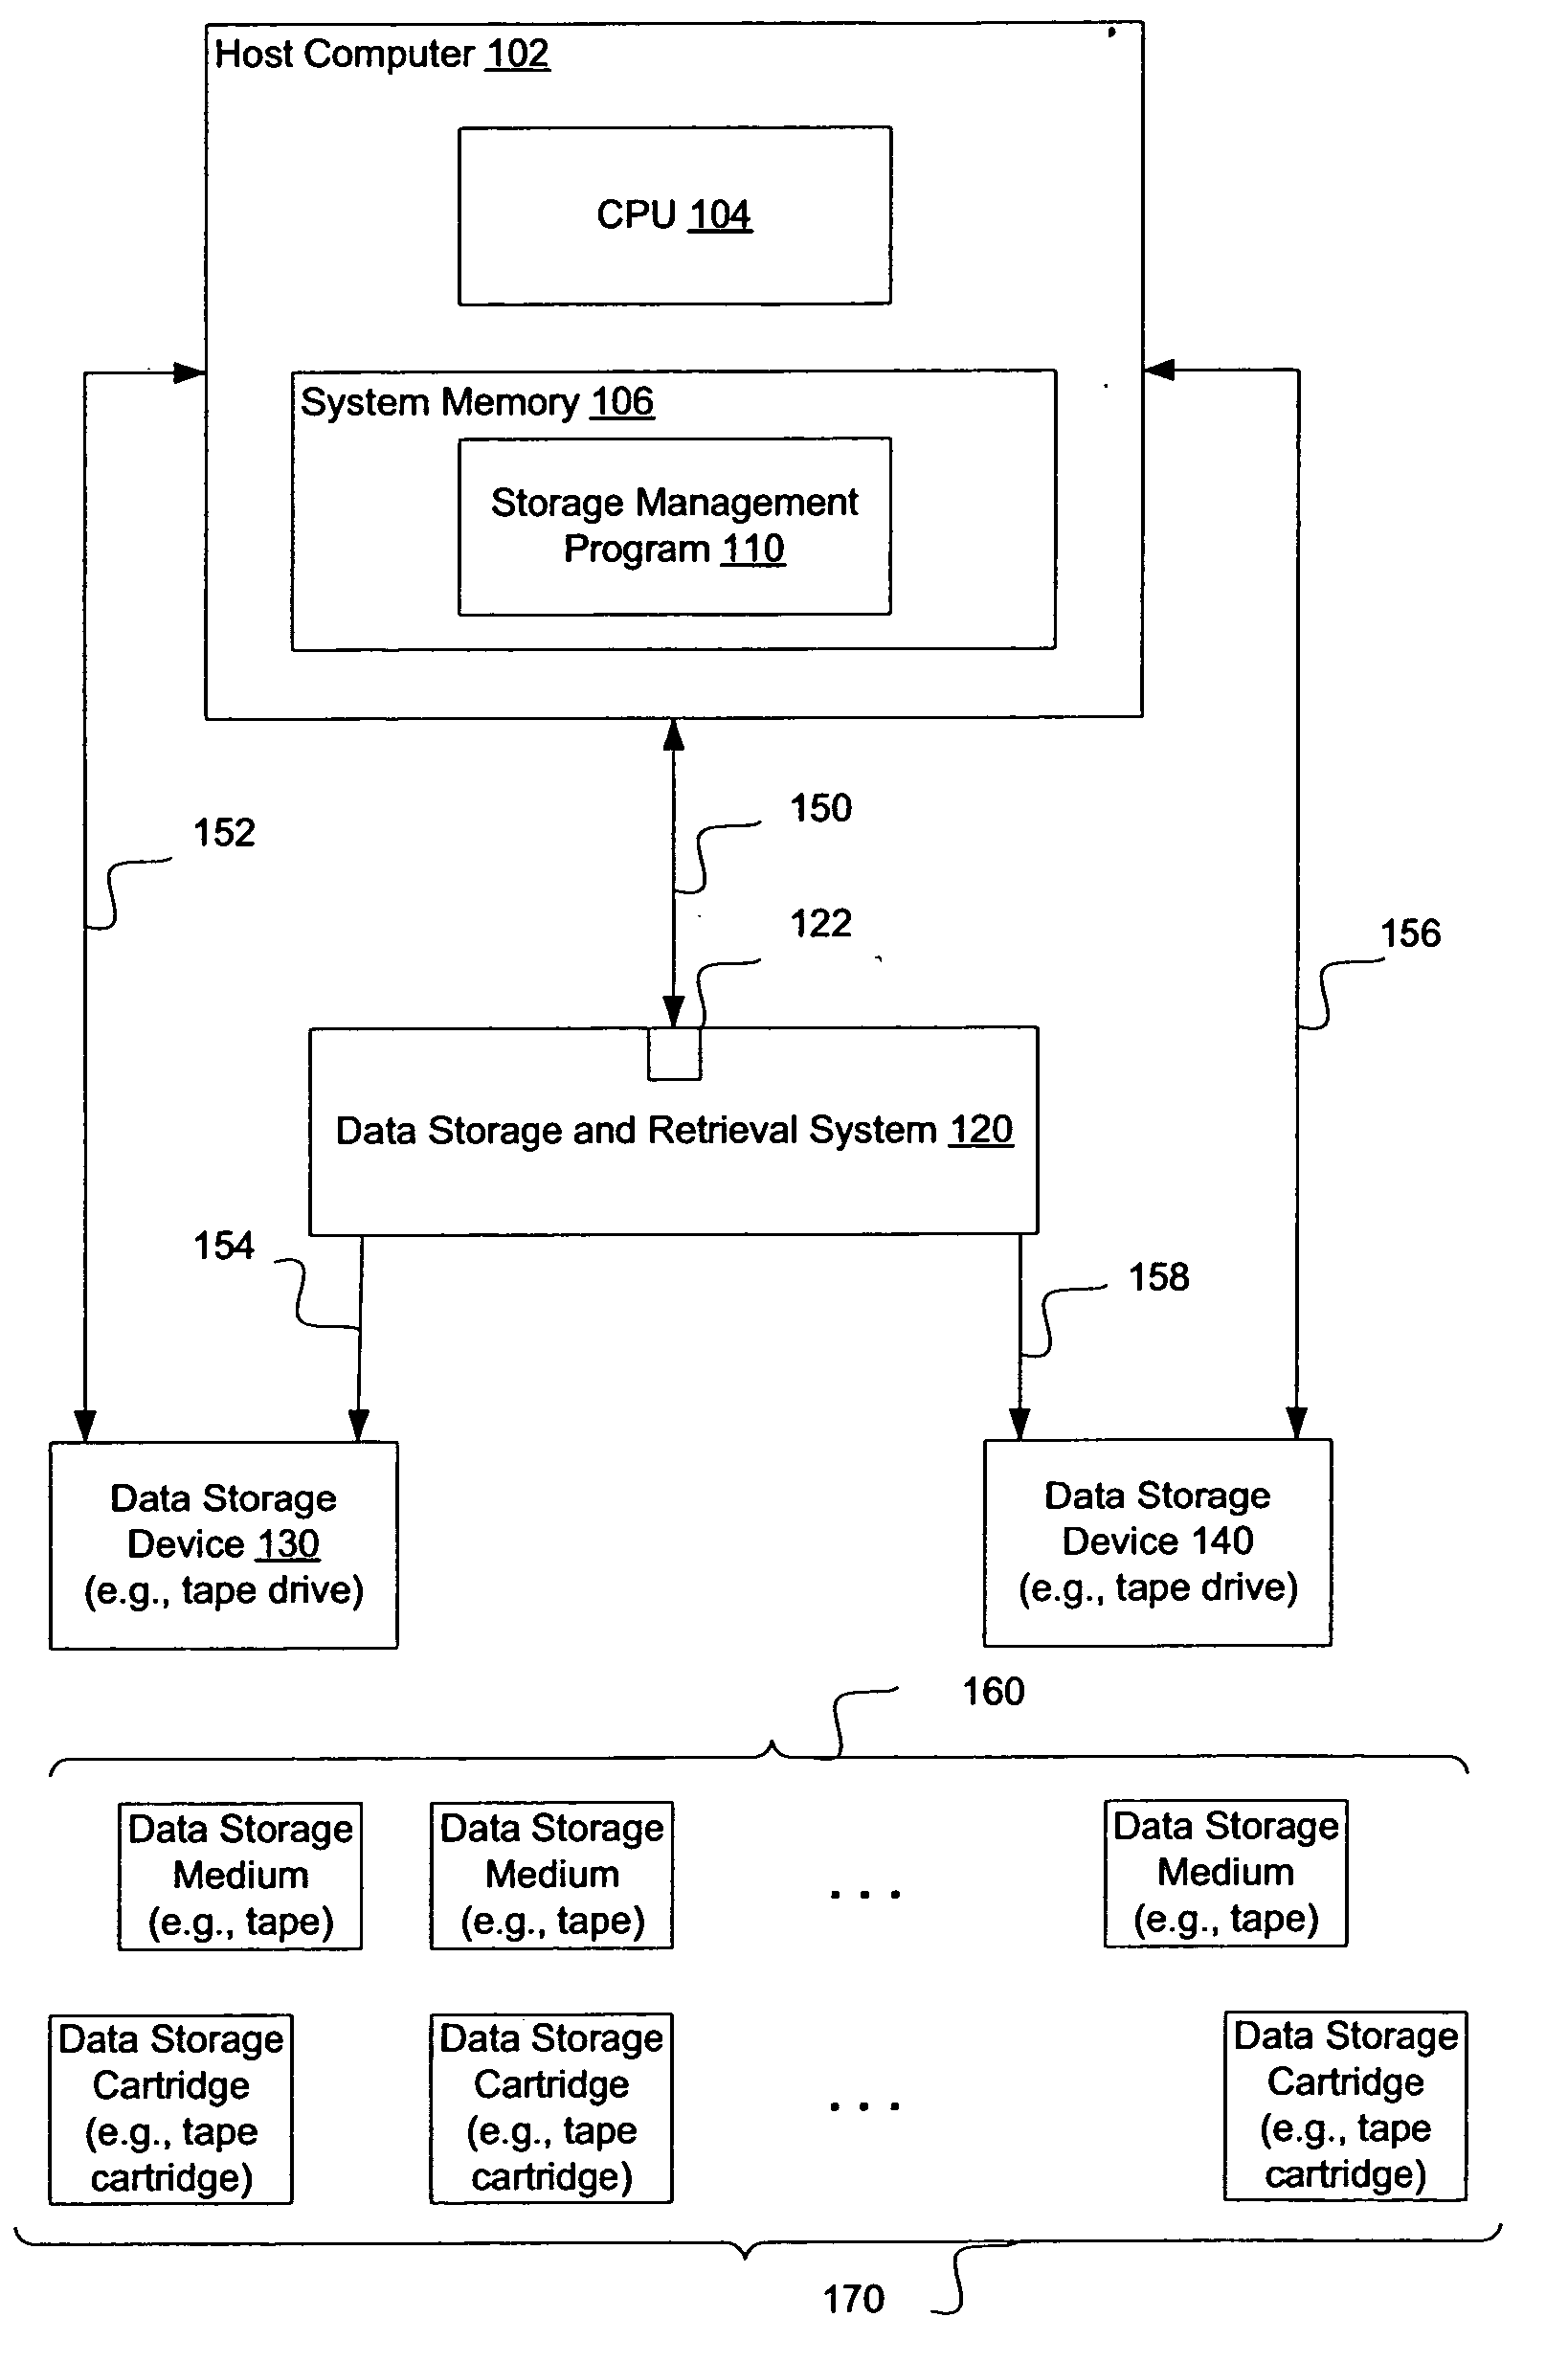 Method, system, and program for real-time channel adaptation